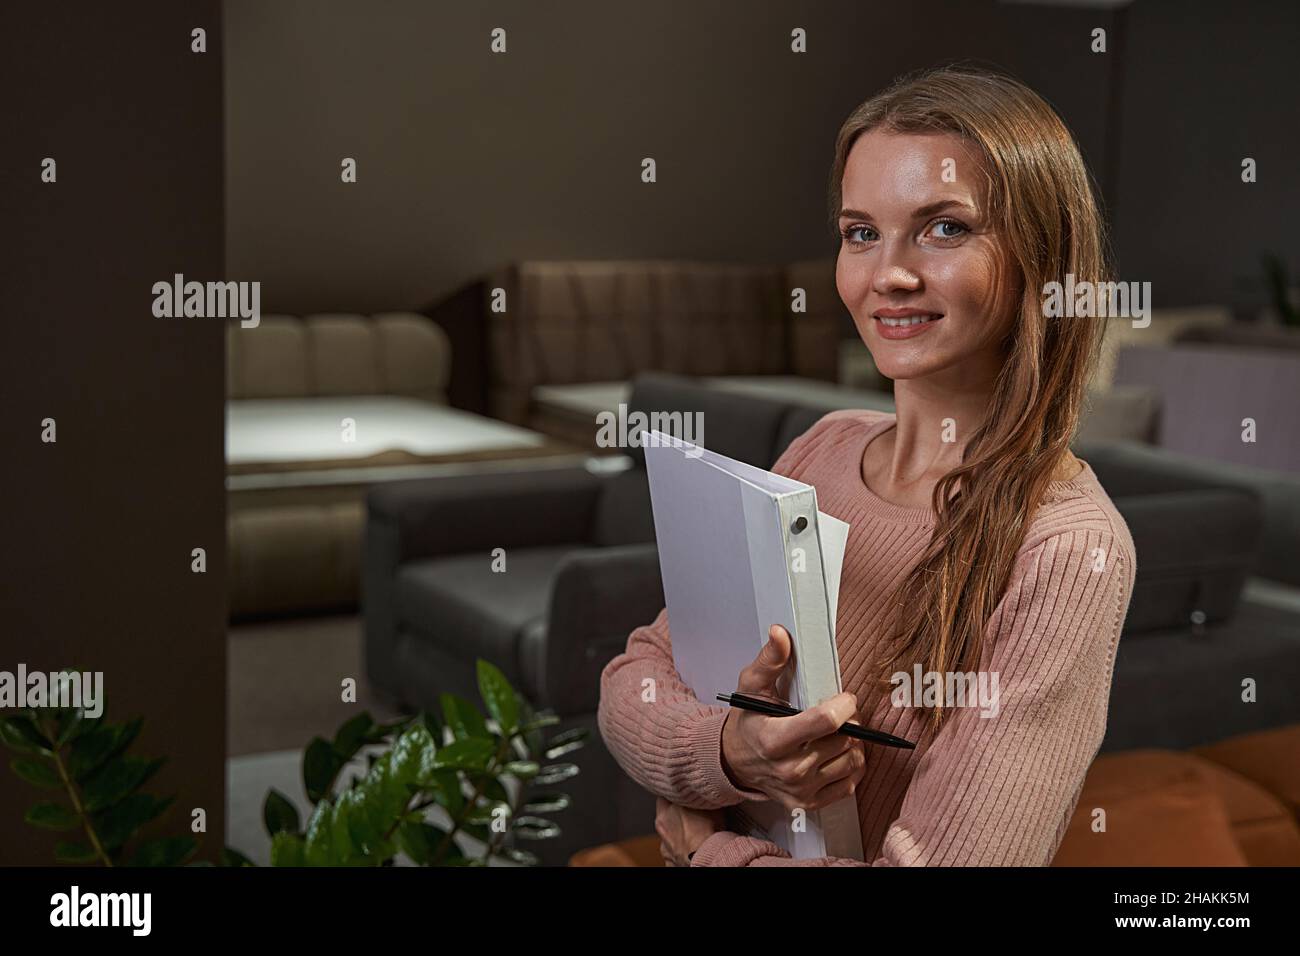 Smiling woman with documents standing in furniture shop Stock Photo